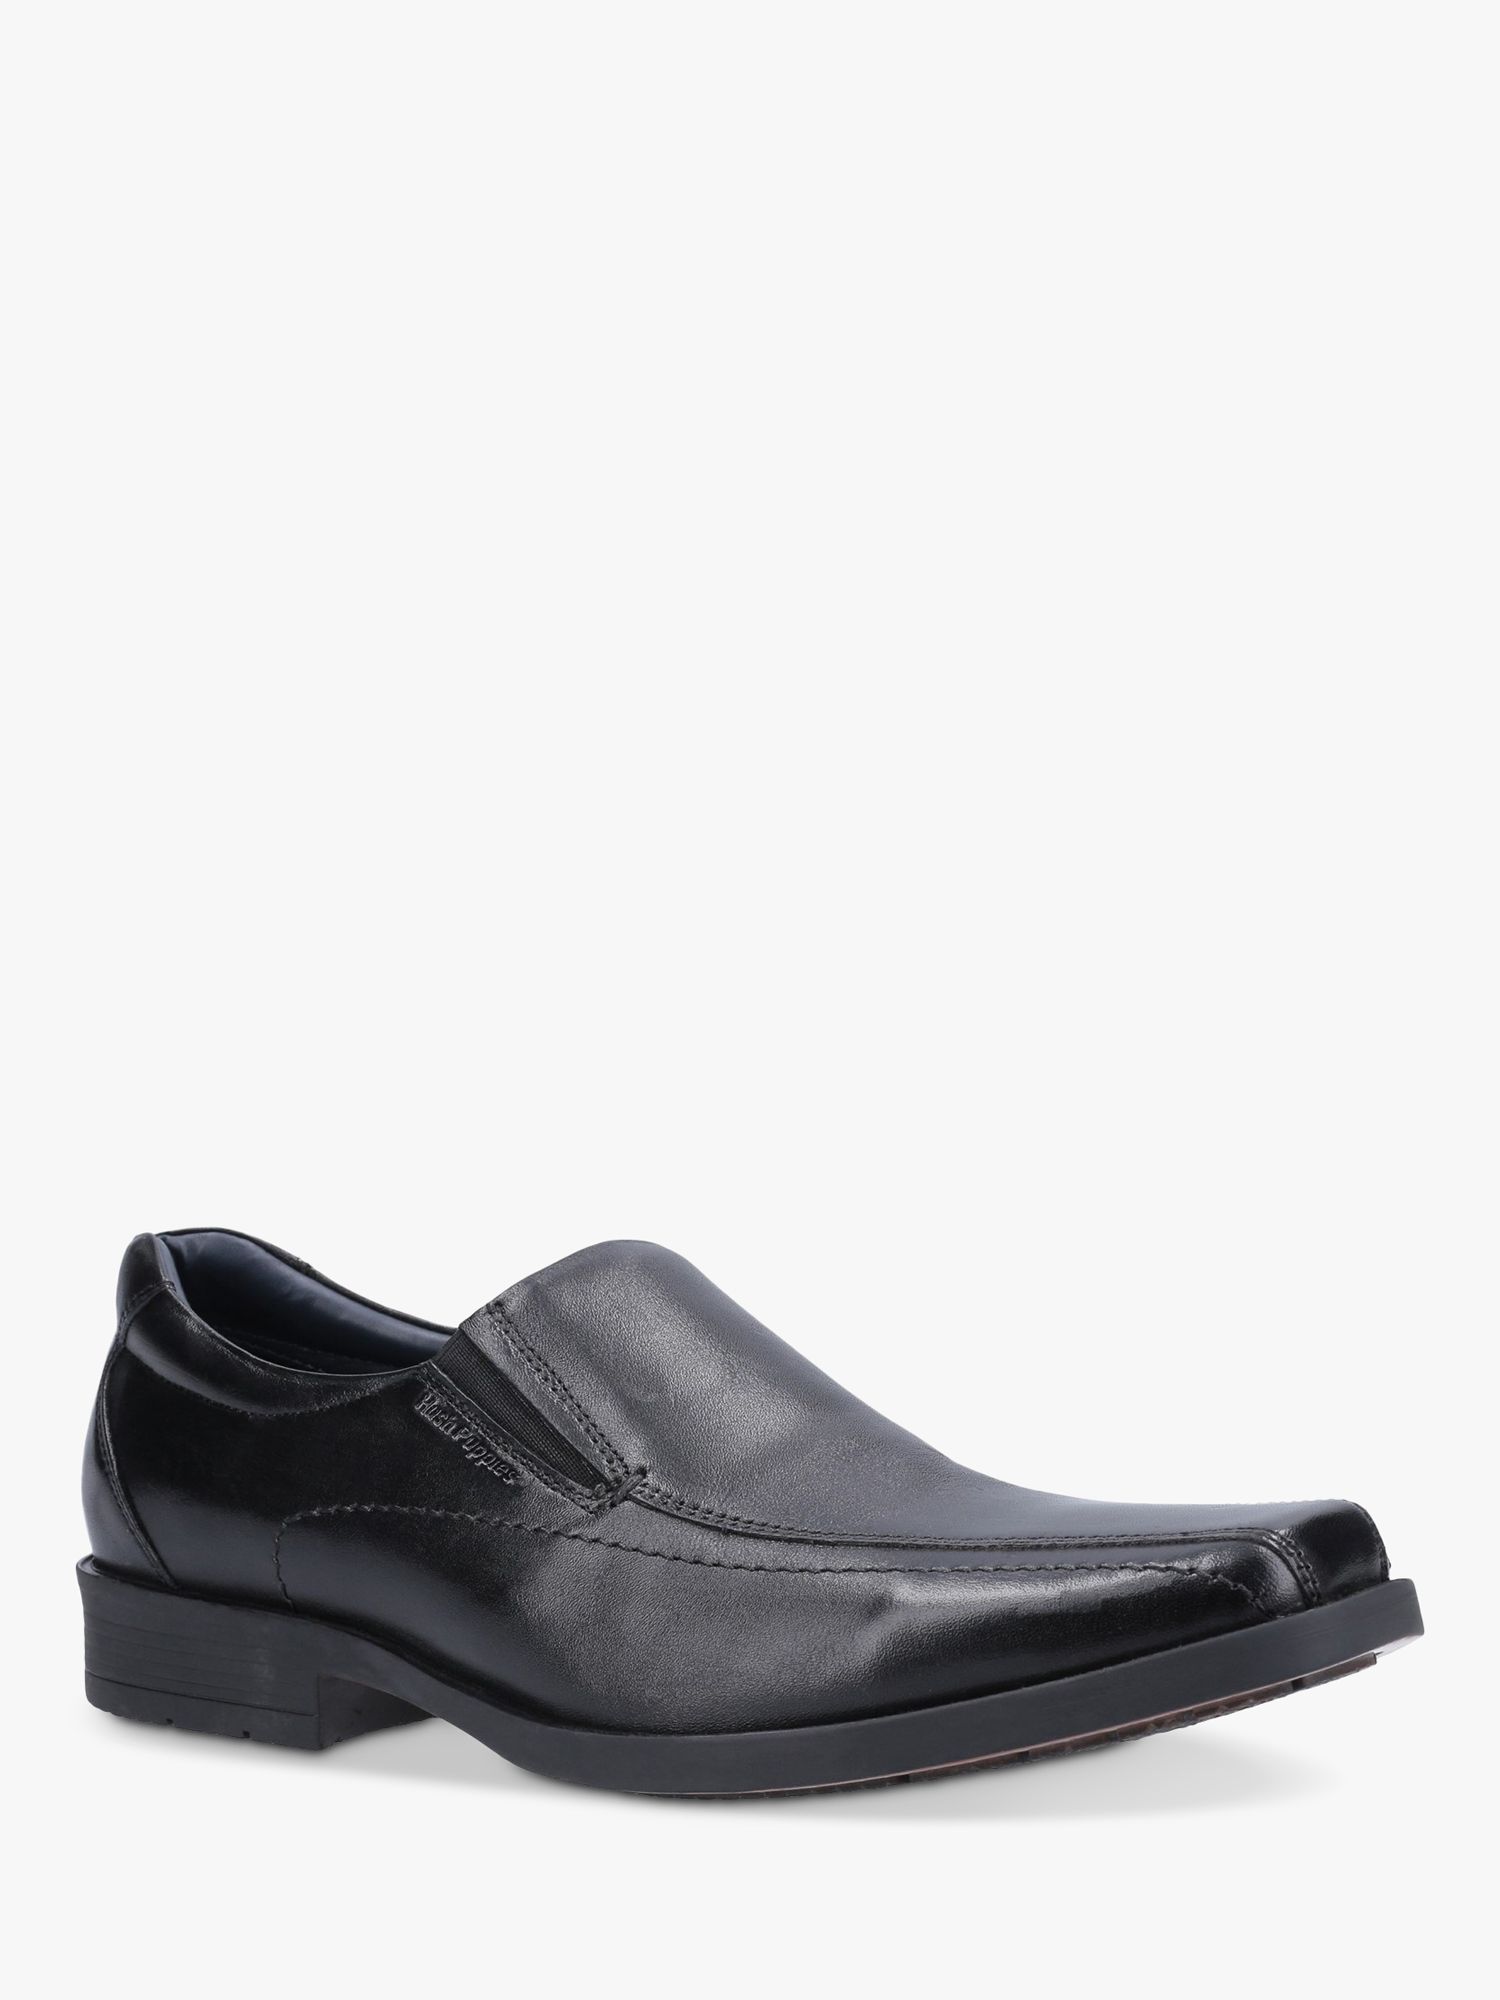 Buy Hush Puppies Brody Leather Slip On Shoes, Black Online at johnlewis.com